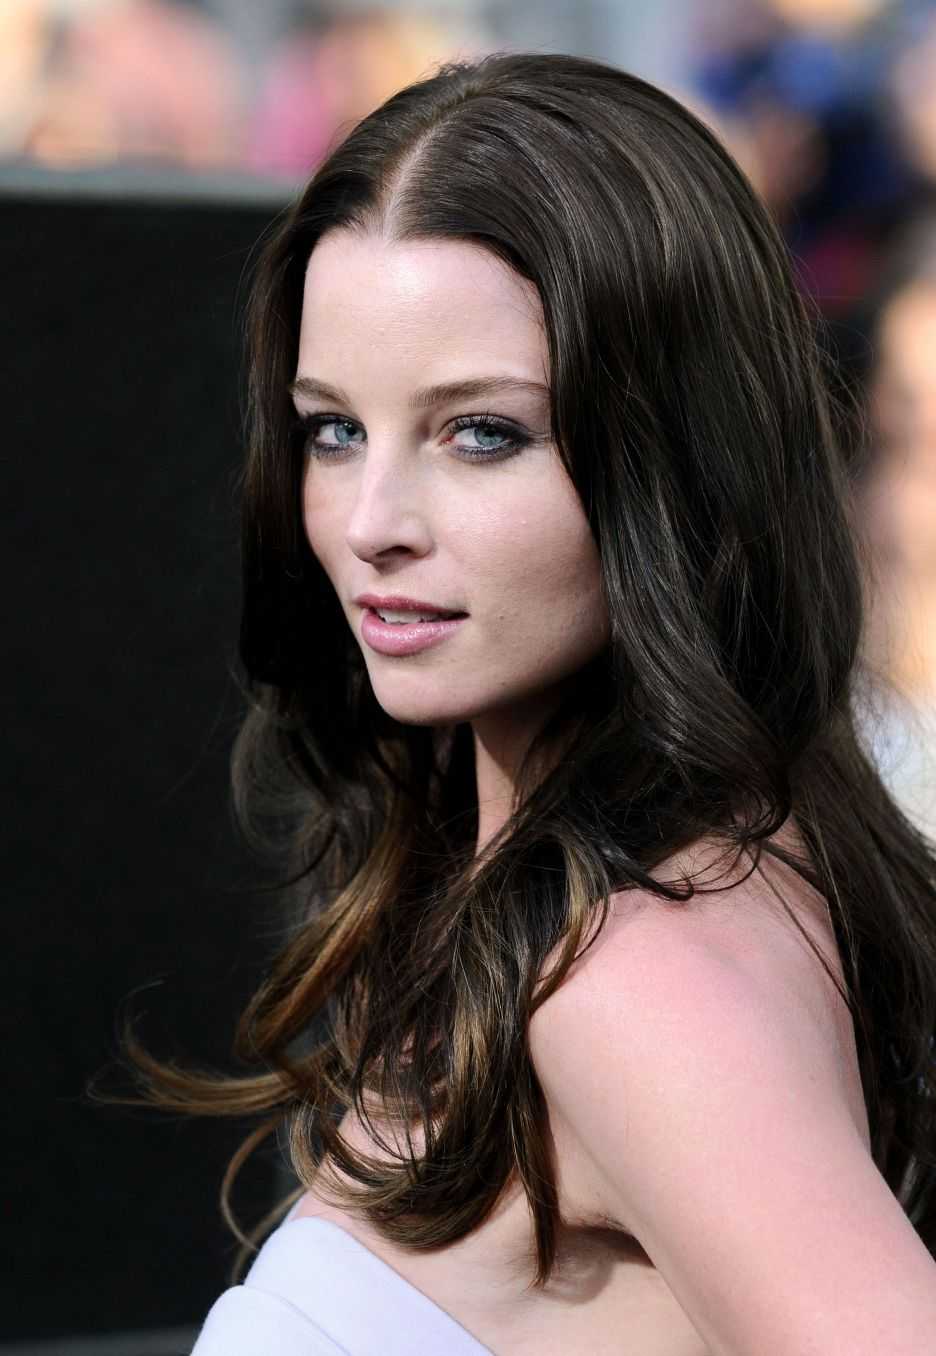 70+ Hot Pictures Of Rachel Nichols Are Just Pure Bliss For Us 21